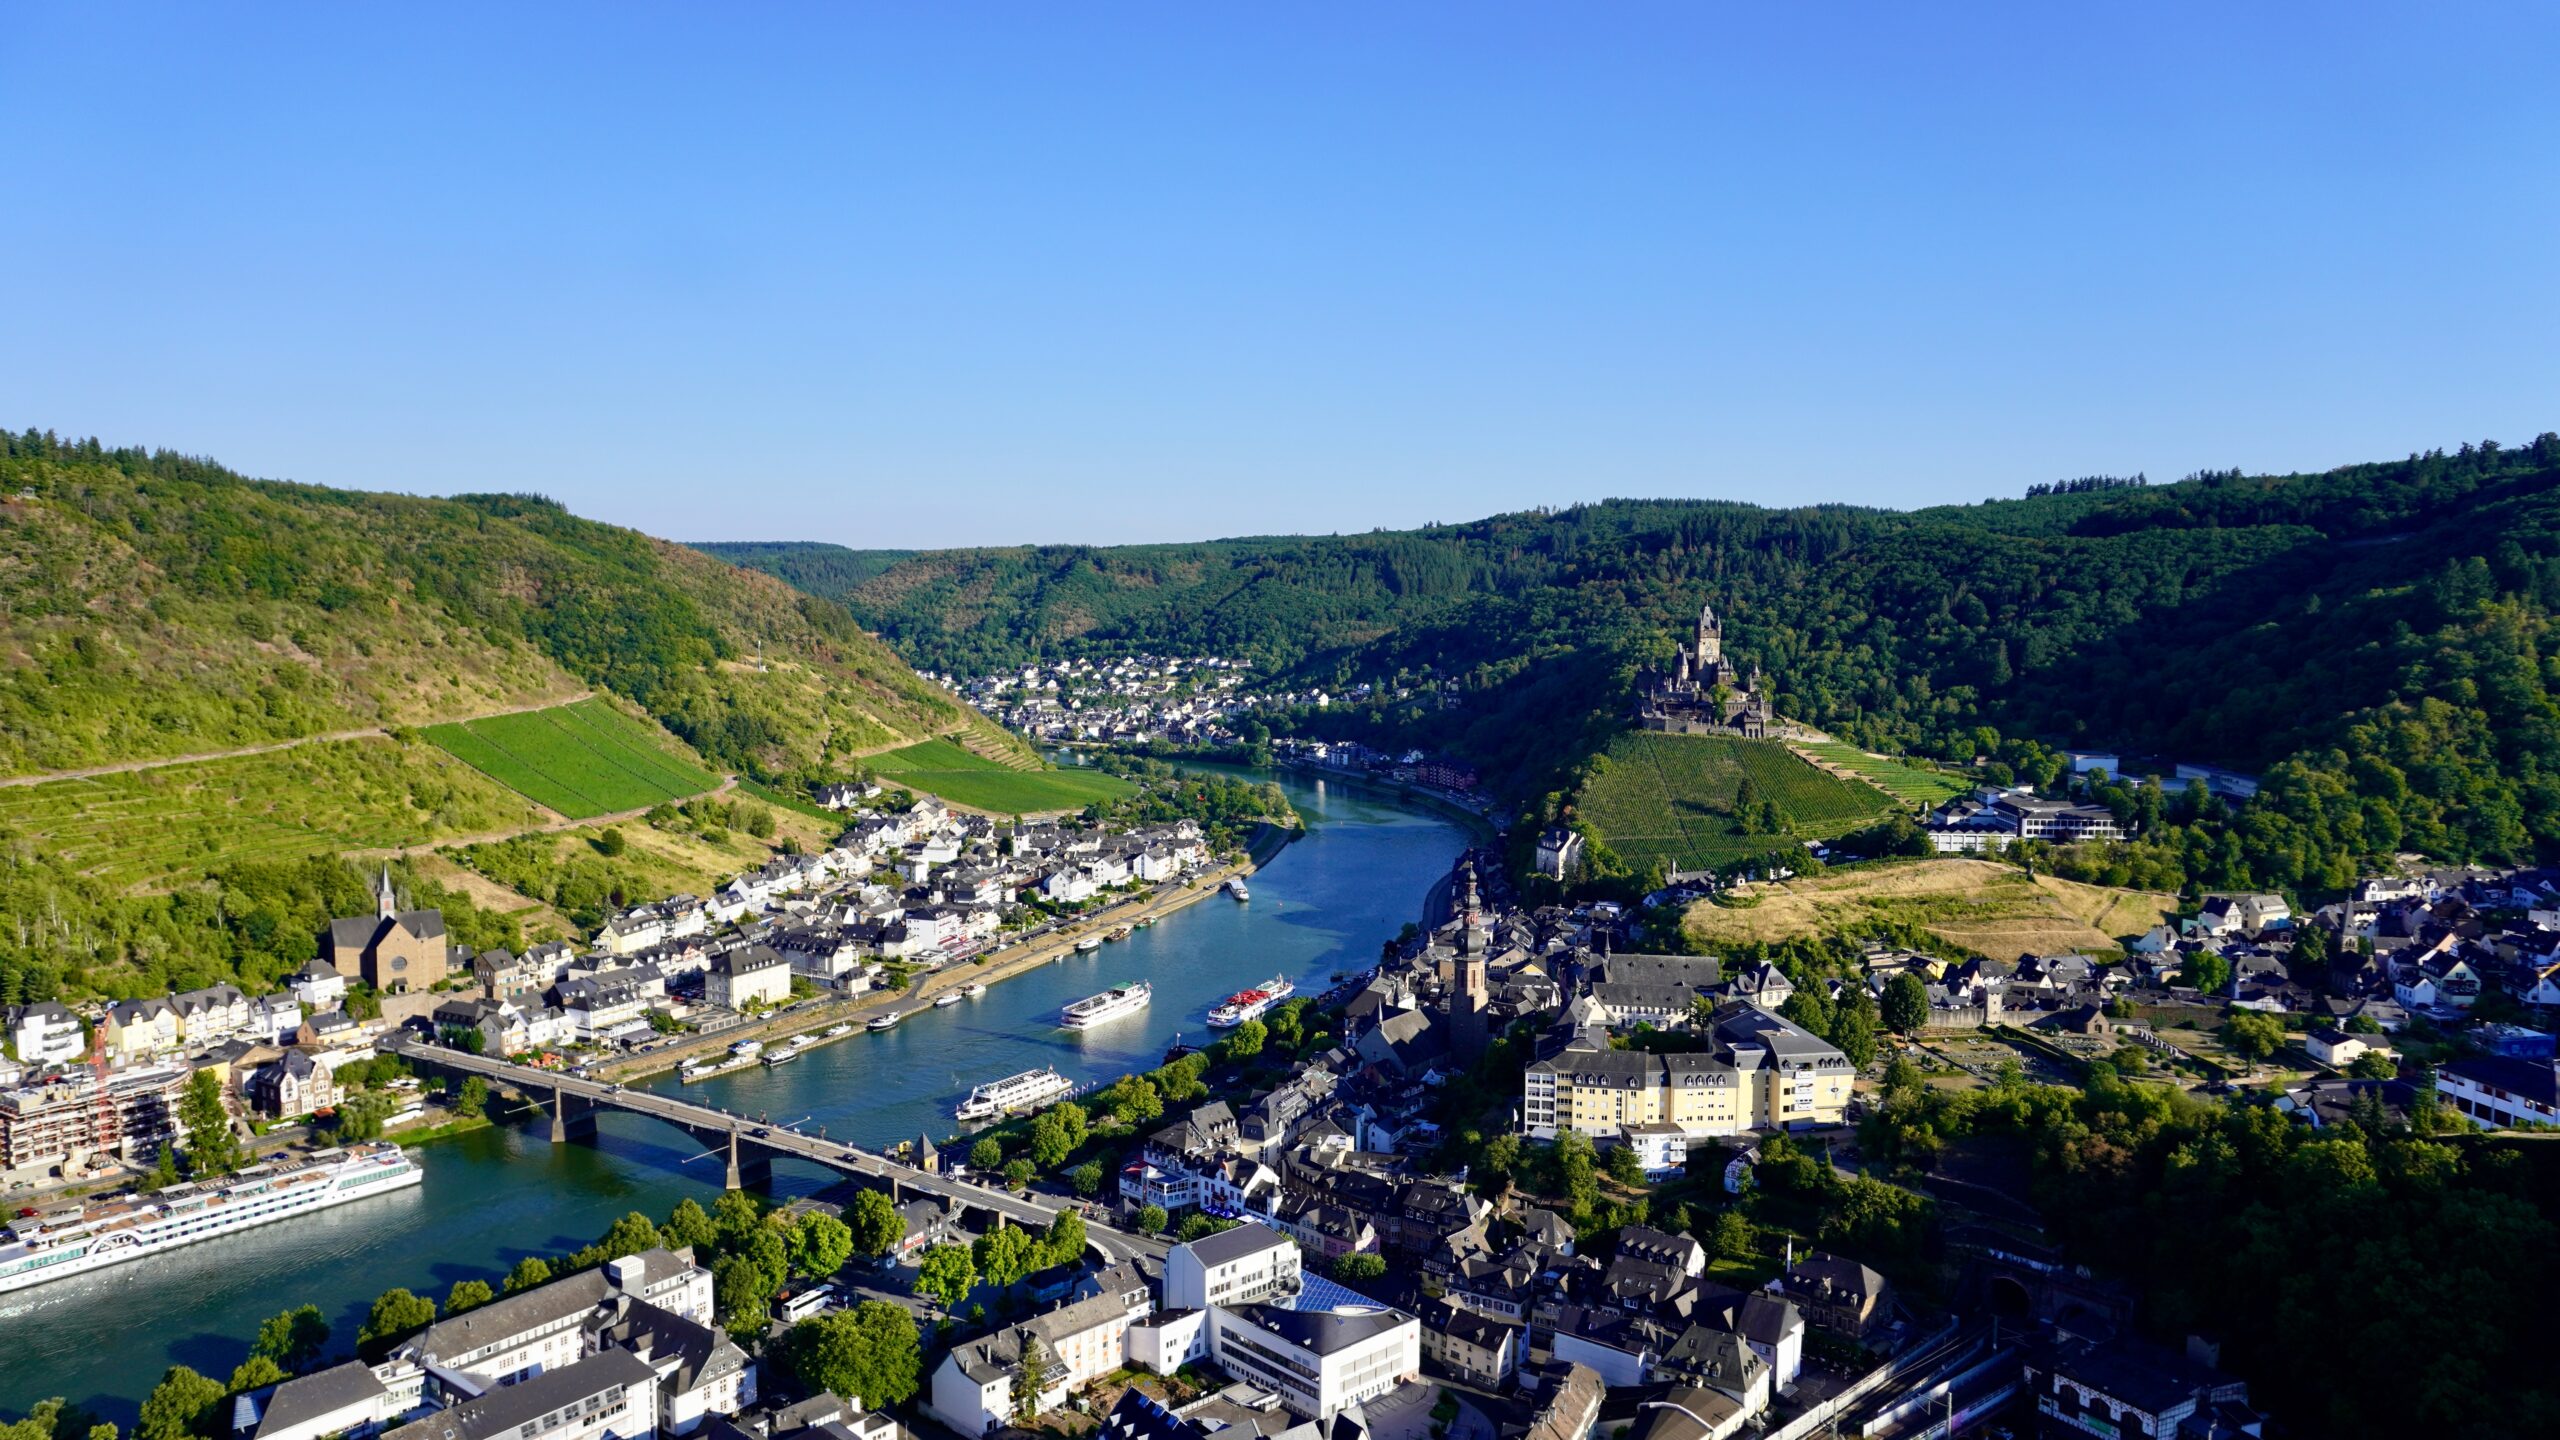 a city view of cochem from the hills showing the river, city, and castle in the moselle wine valley